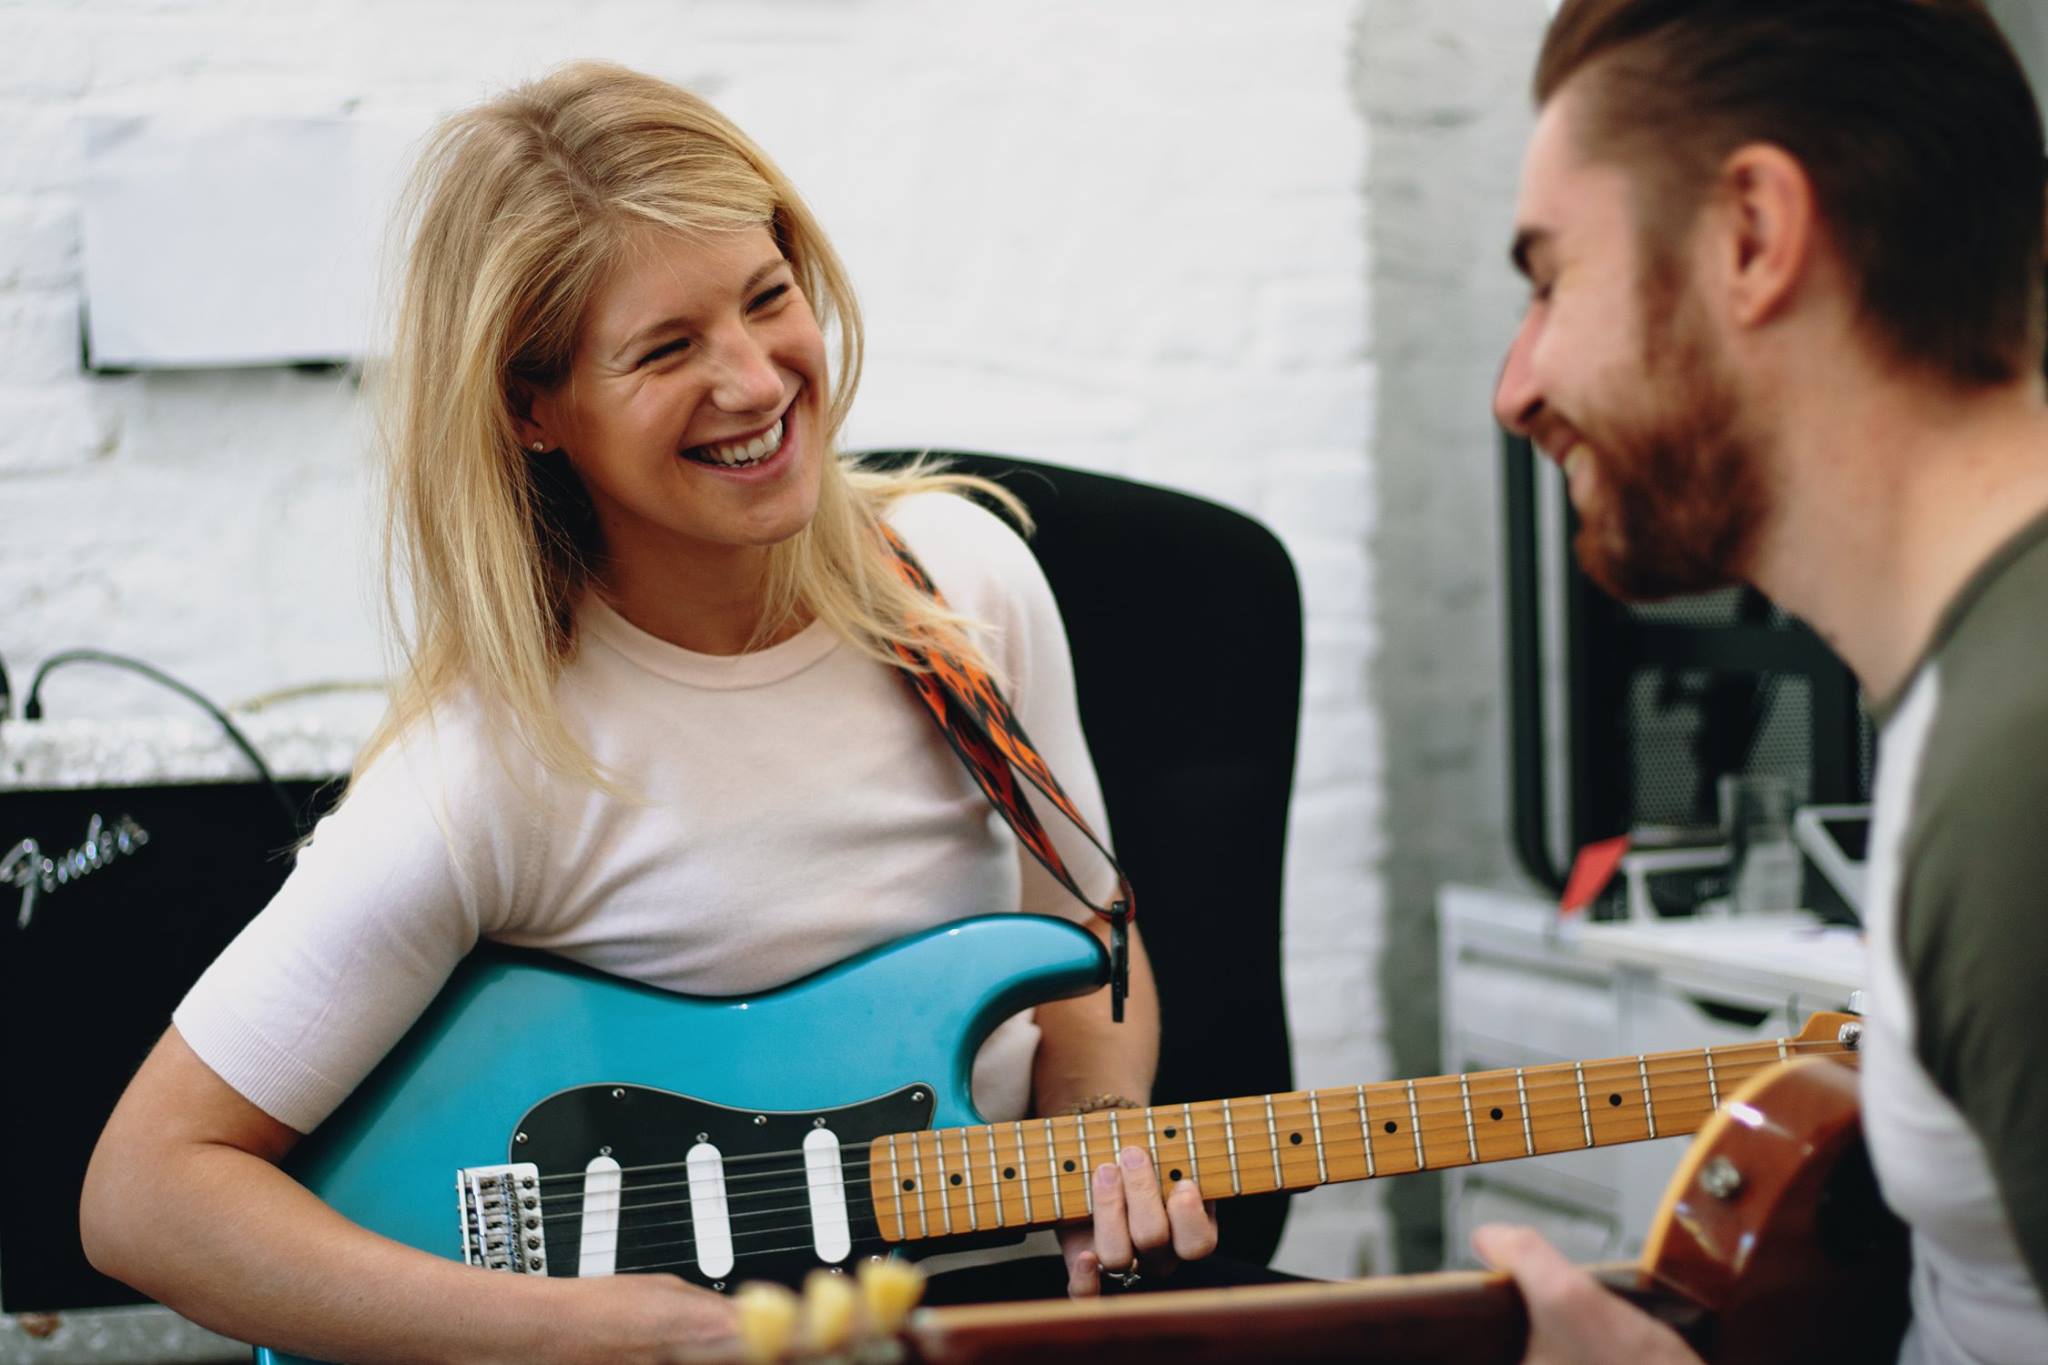  Guitar Lessons and Guitar Teachers in Barnes, Greater London